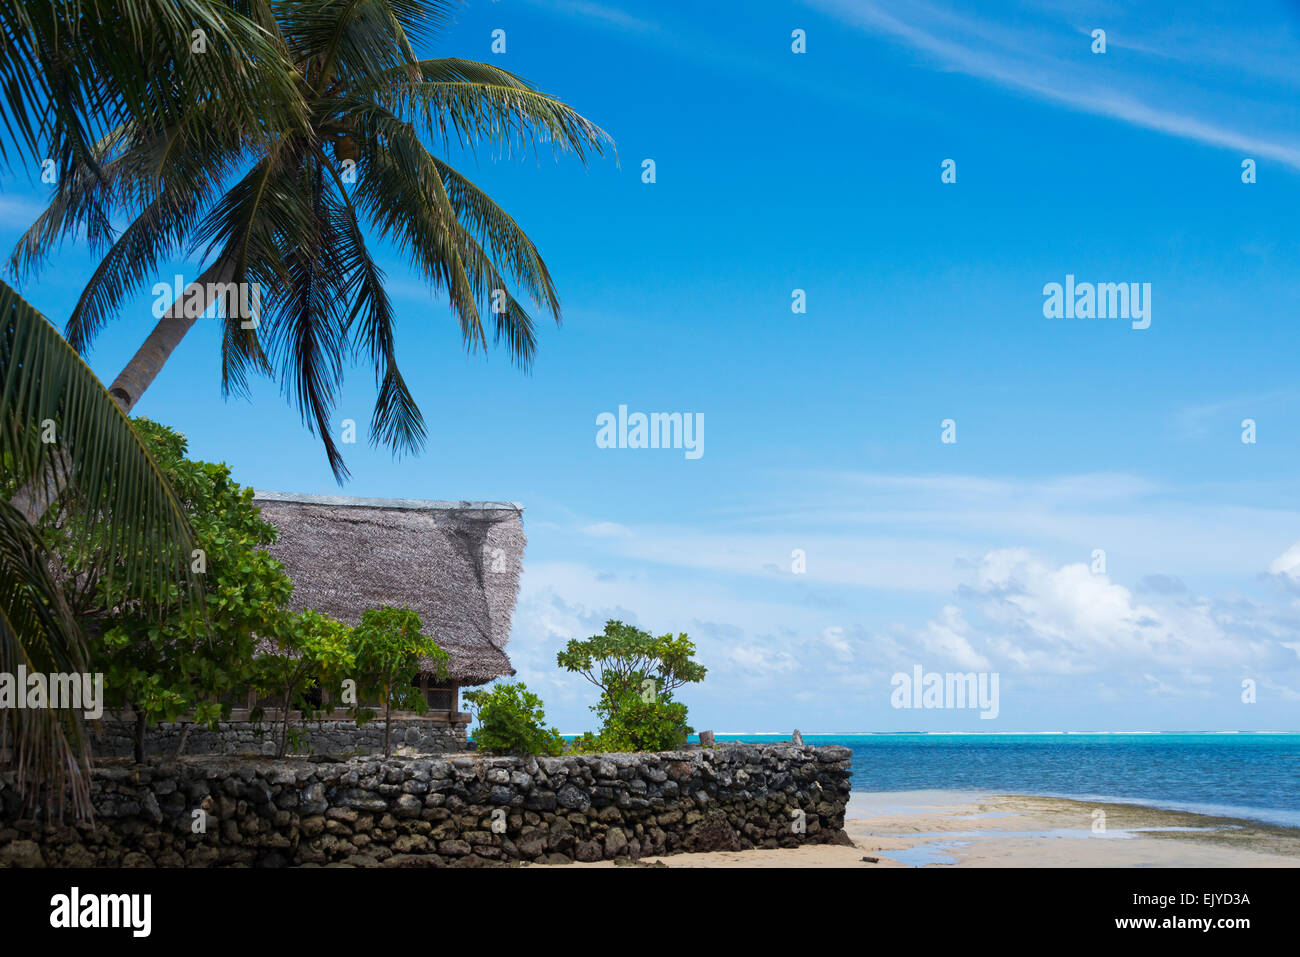 Men's house by the ocean, Yap Island, Federated States of Micronesia Stock Photo